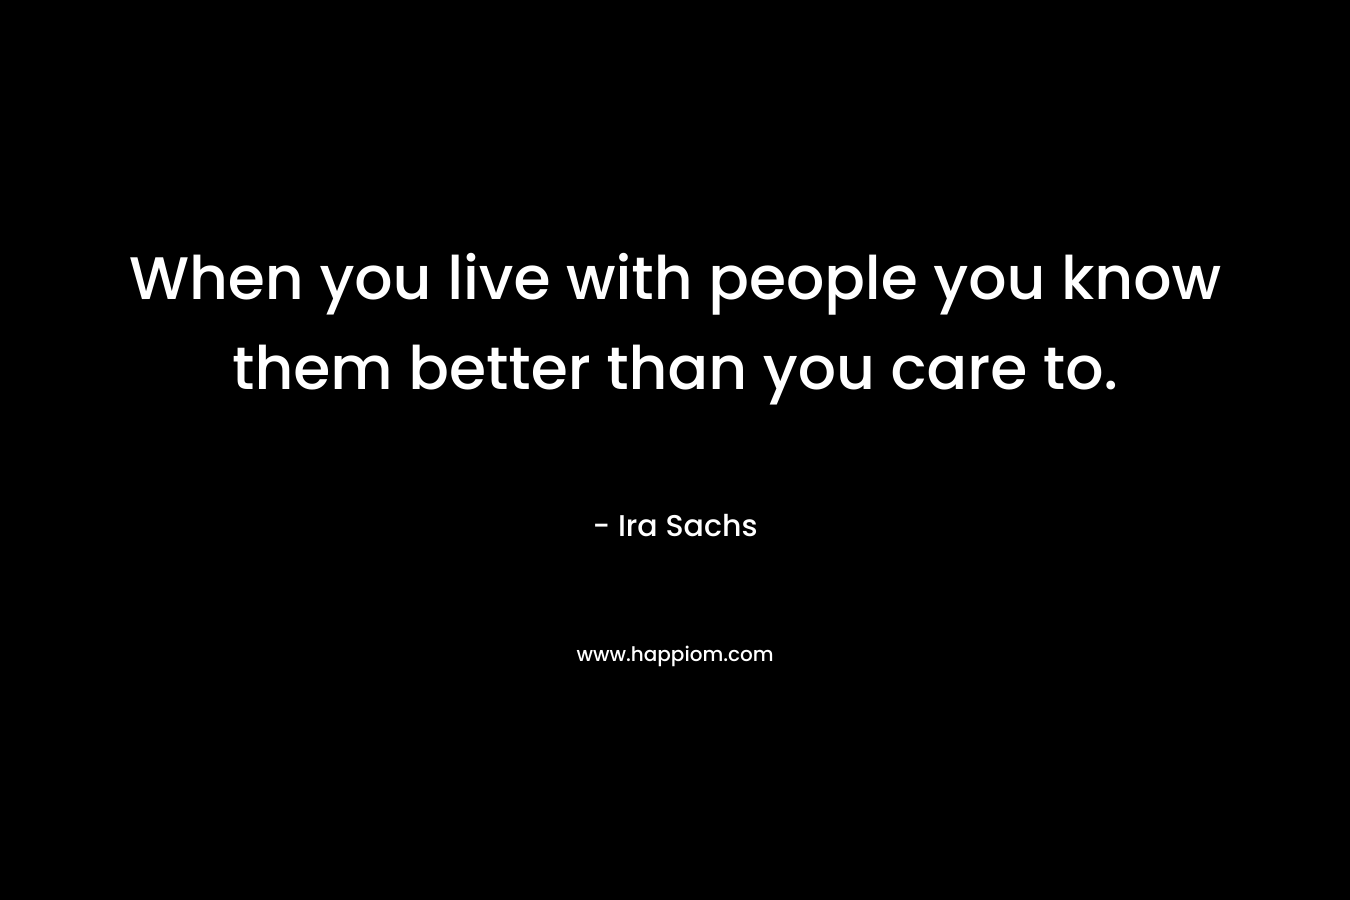 When you live with people you know them better than you care to. – Ira Sachs